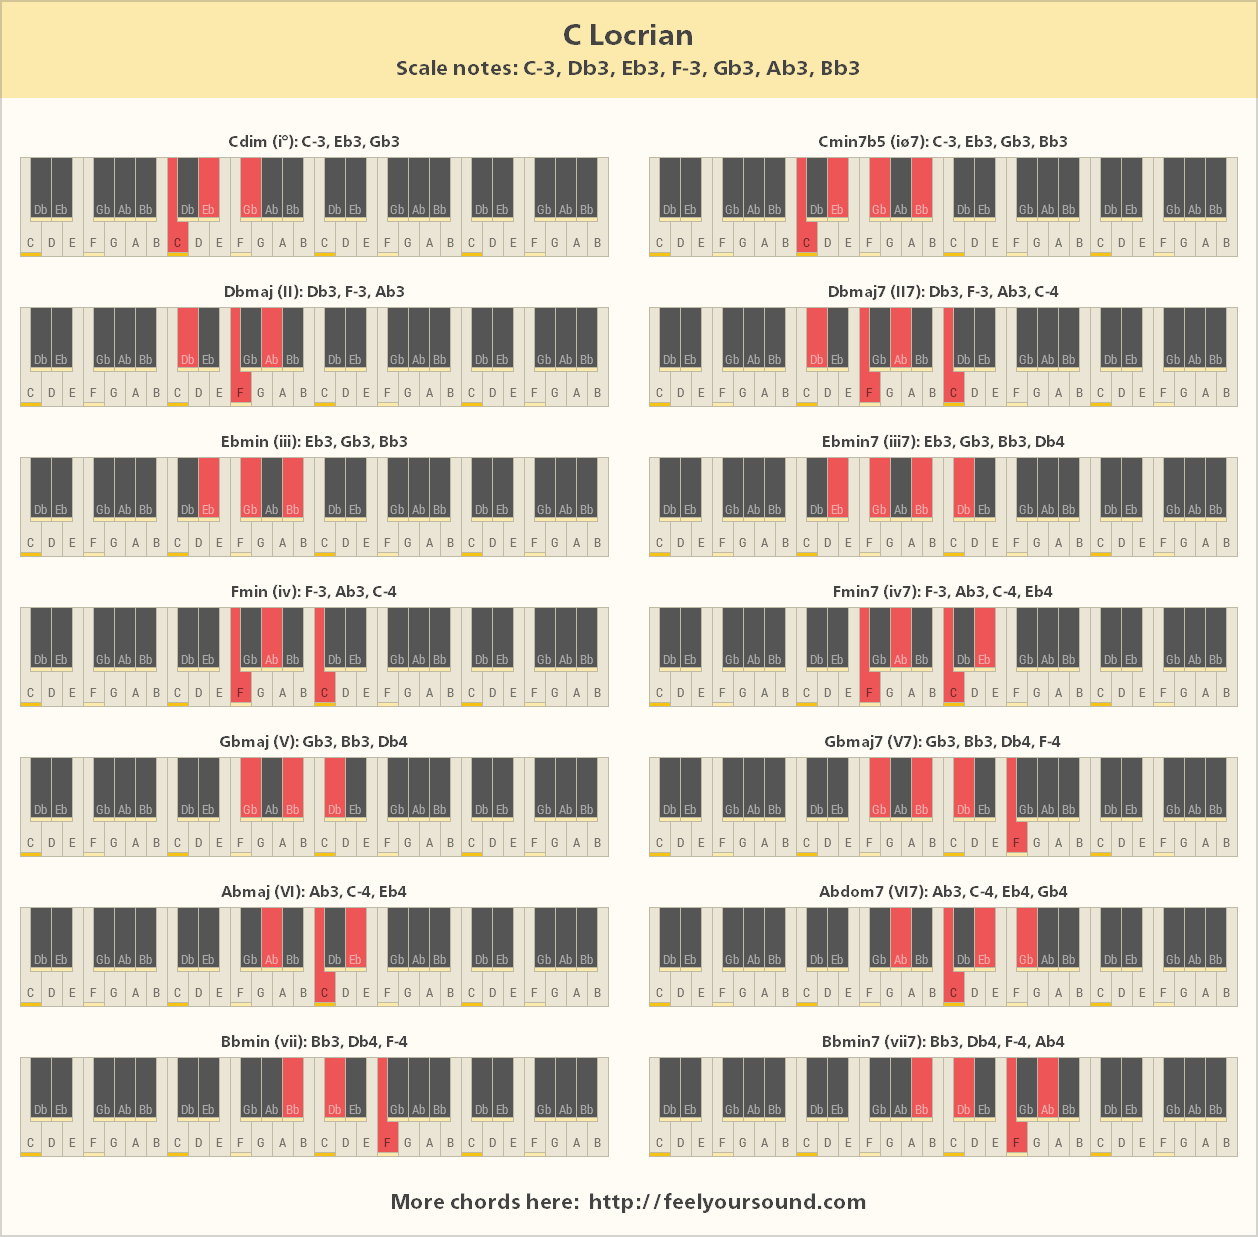 All important chords of C Locrian